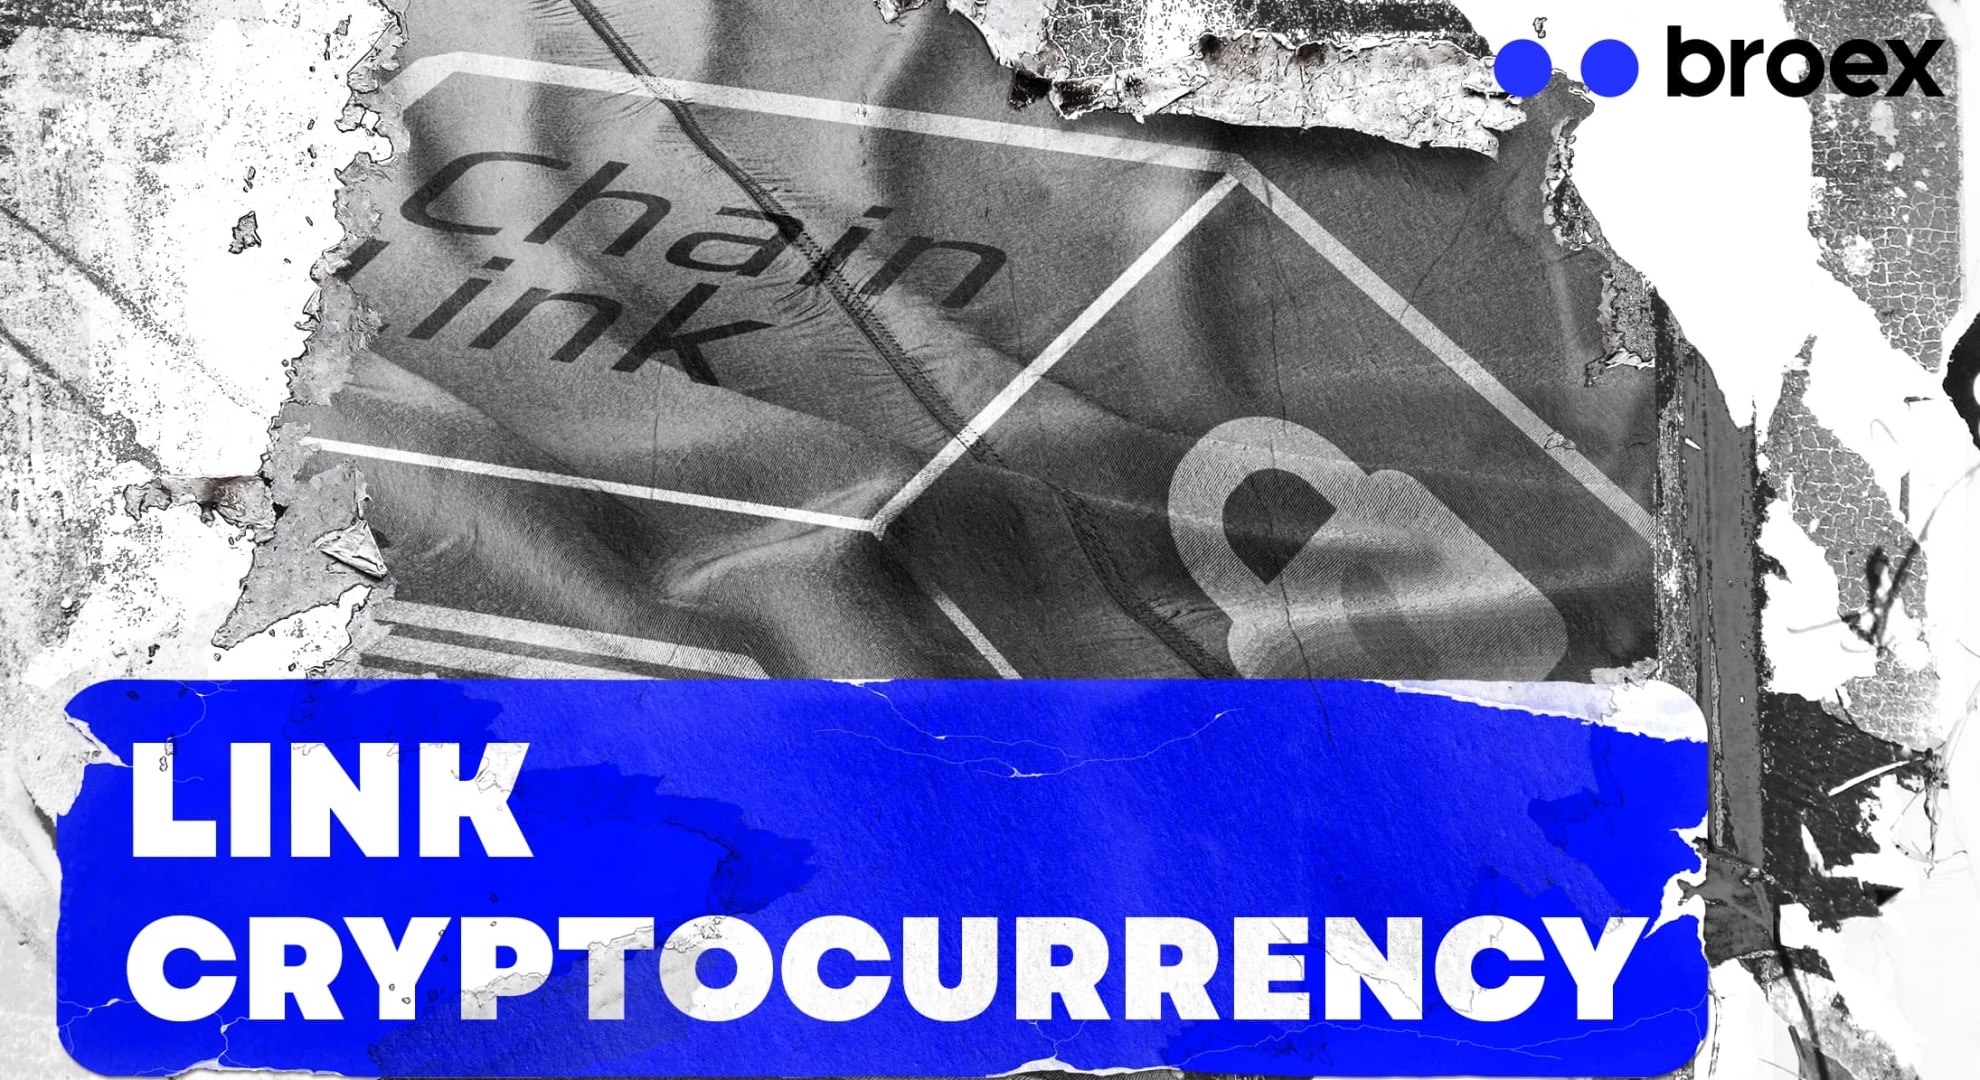 LINK cryptocurrency